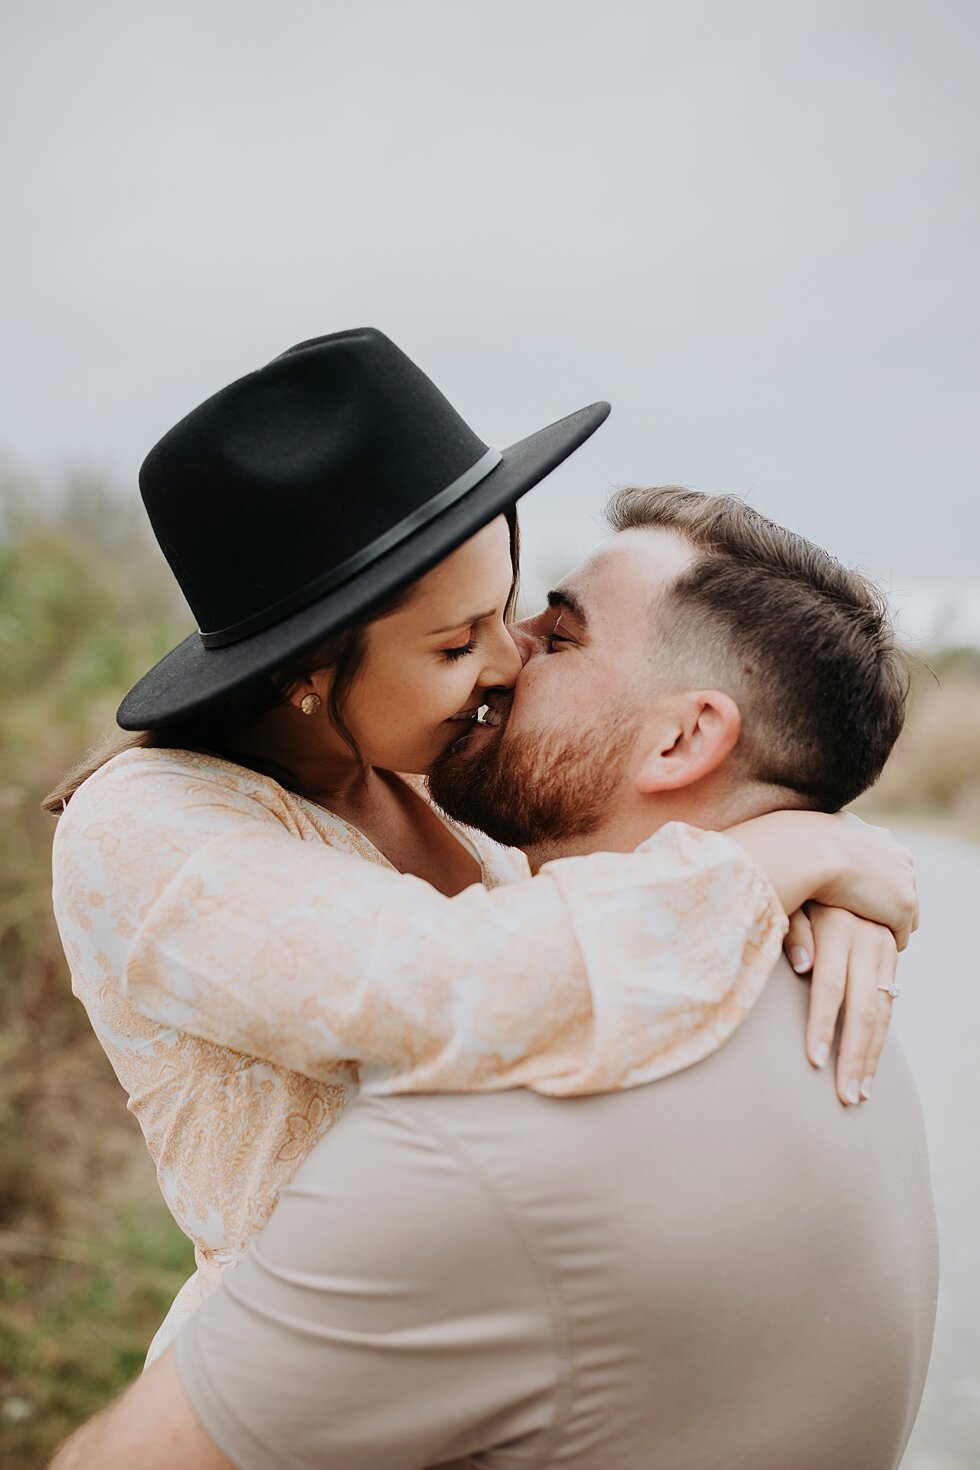  couple almost kiss during engagement session     #engagementgoals #engagementphotographer #engaged #outdoorengagement #kentuckyphotographer #indianaphotographer #louisvillephotographer #engagementphotos #savethedatephotos #savethedates #engagementph